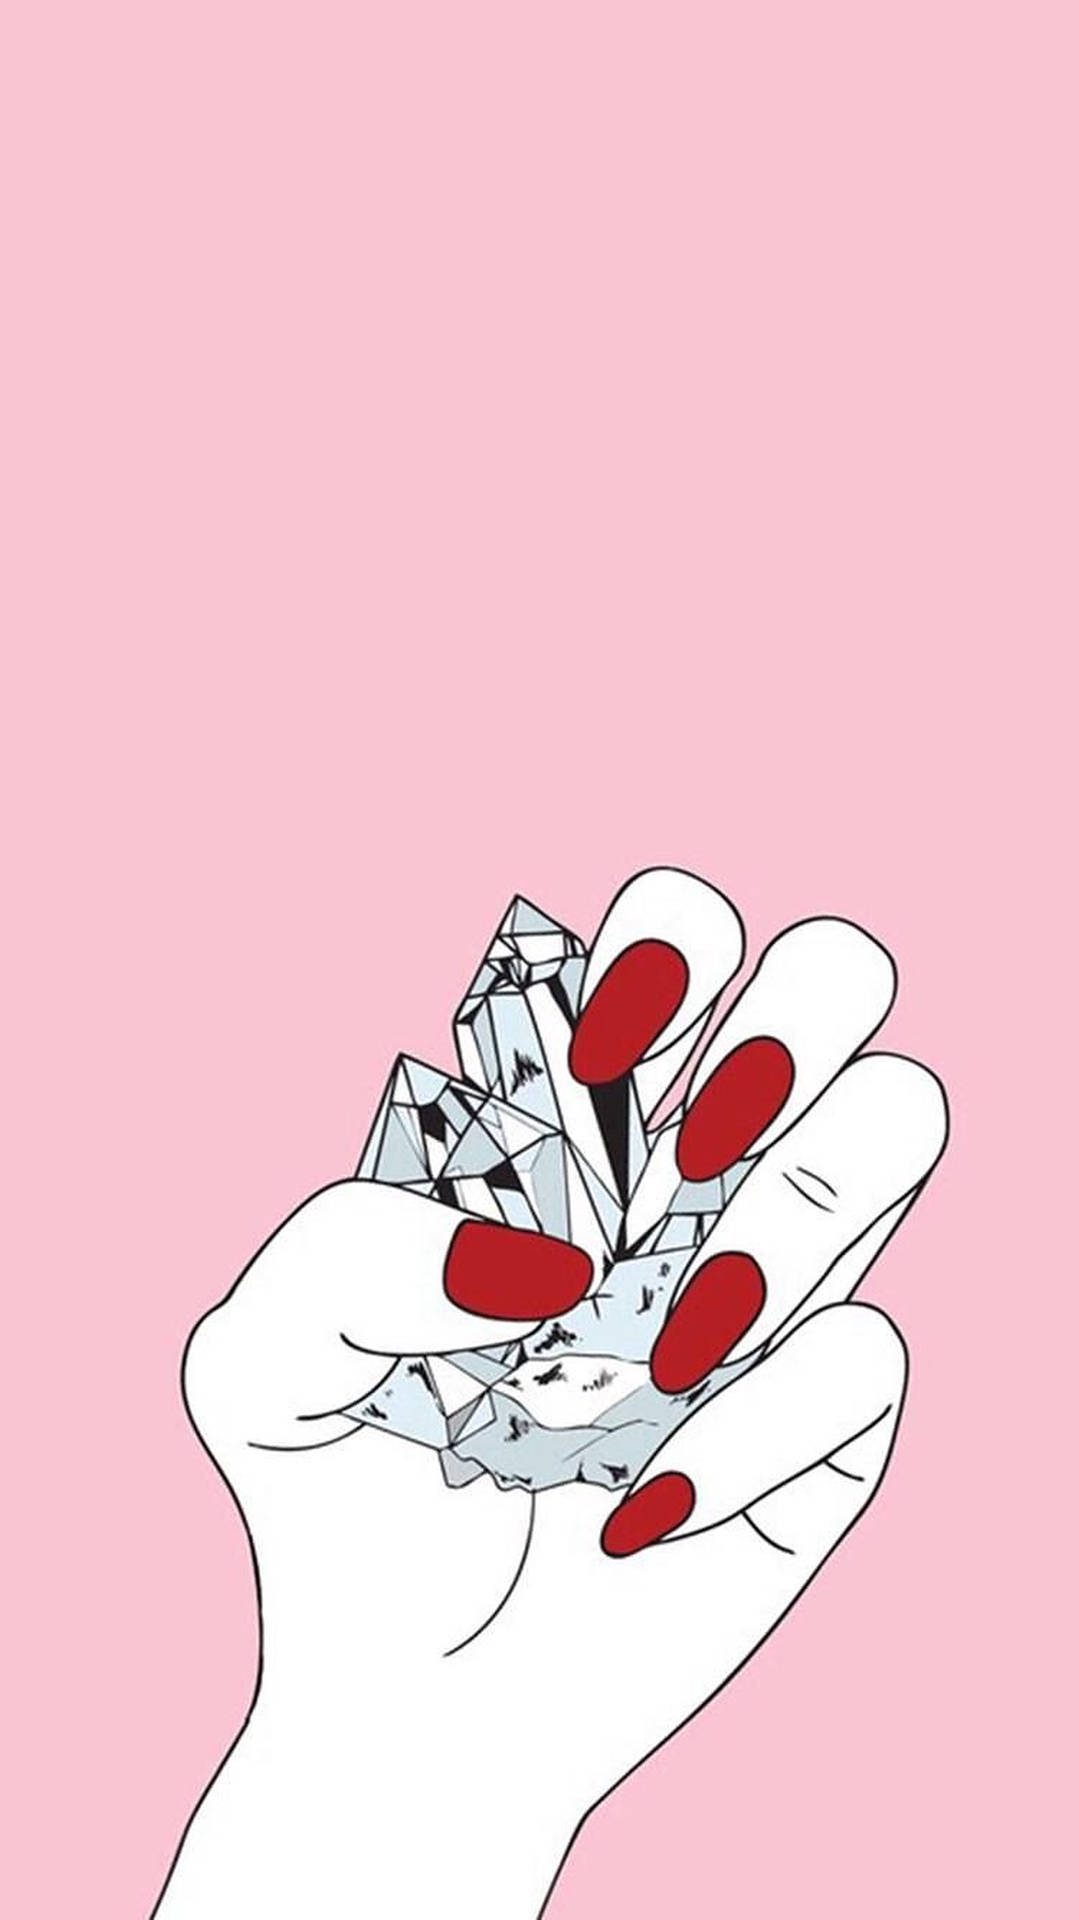 Red Nails Holding Crystal